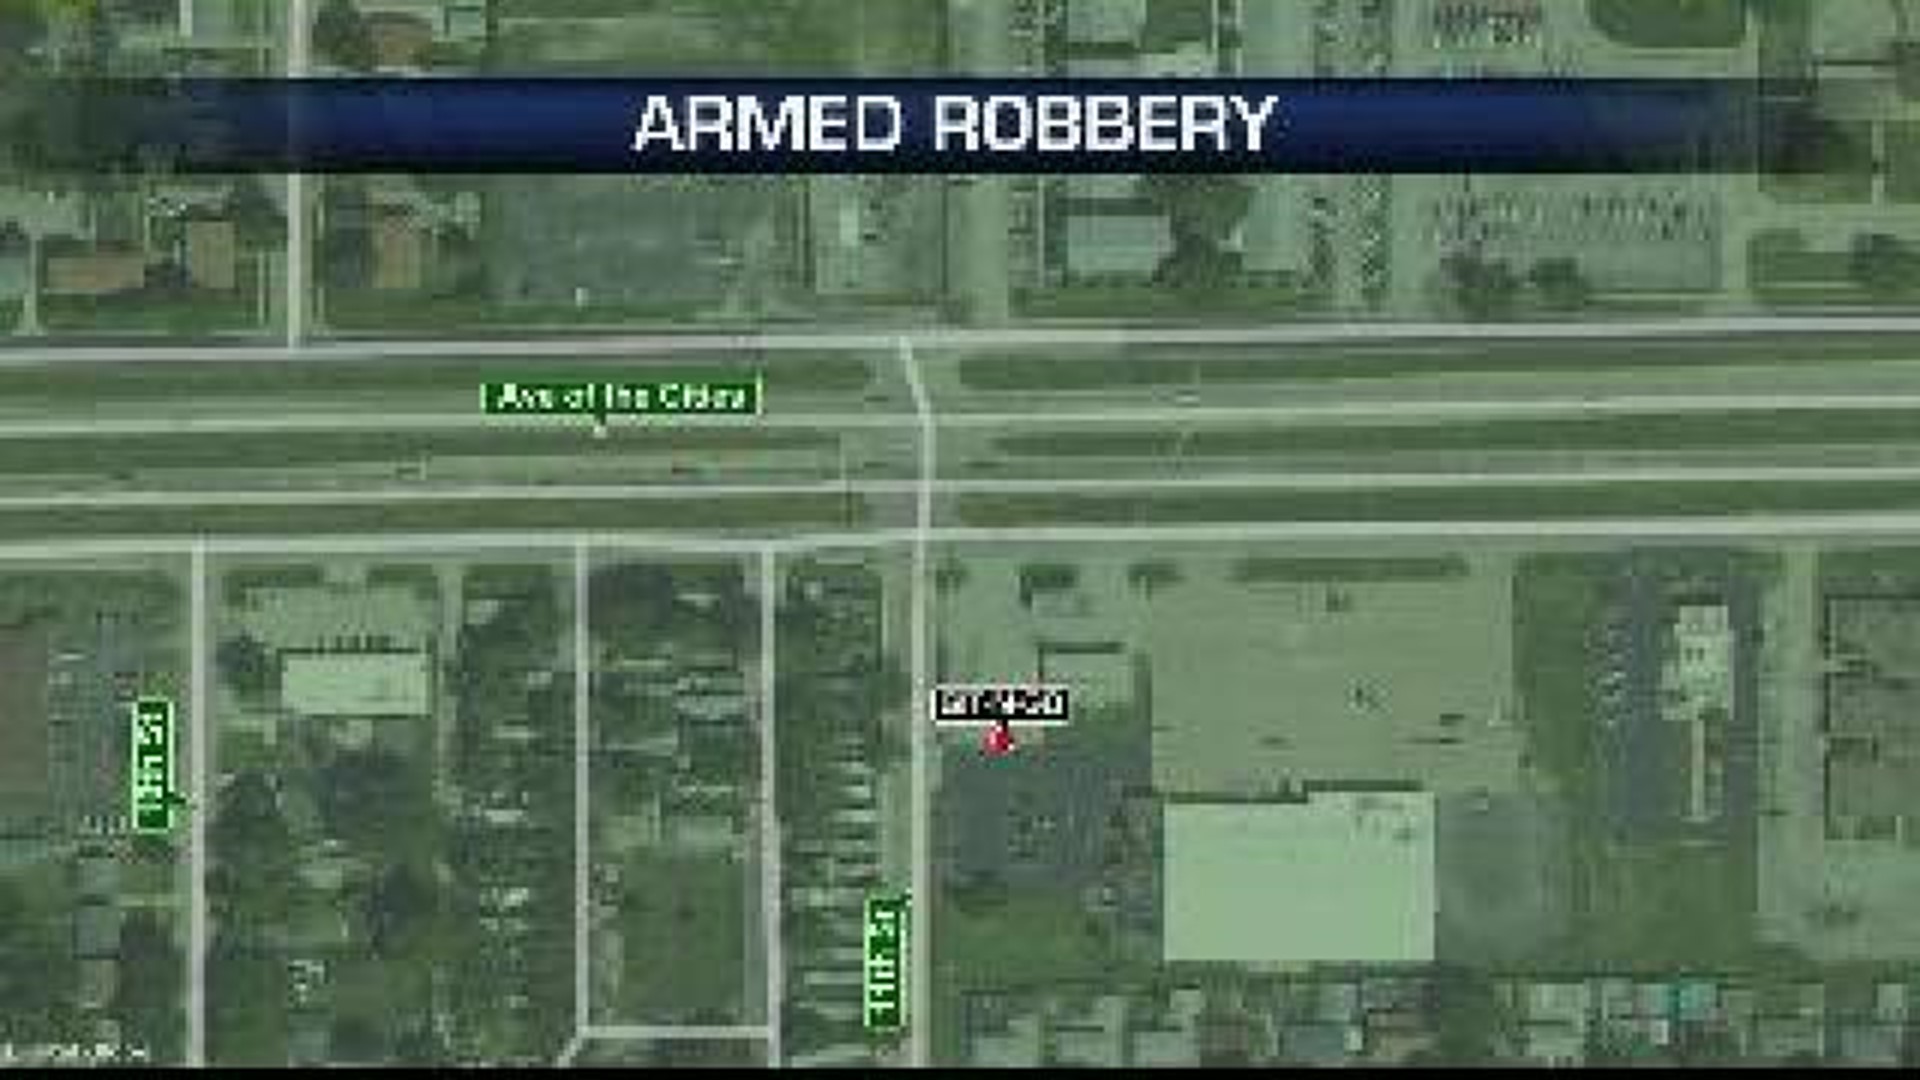 Man in custody after allegedly robbing East Moline gas station